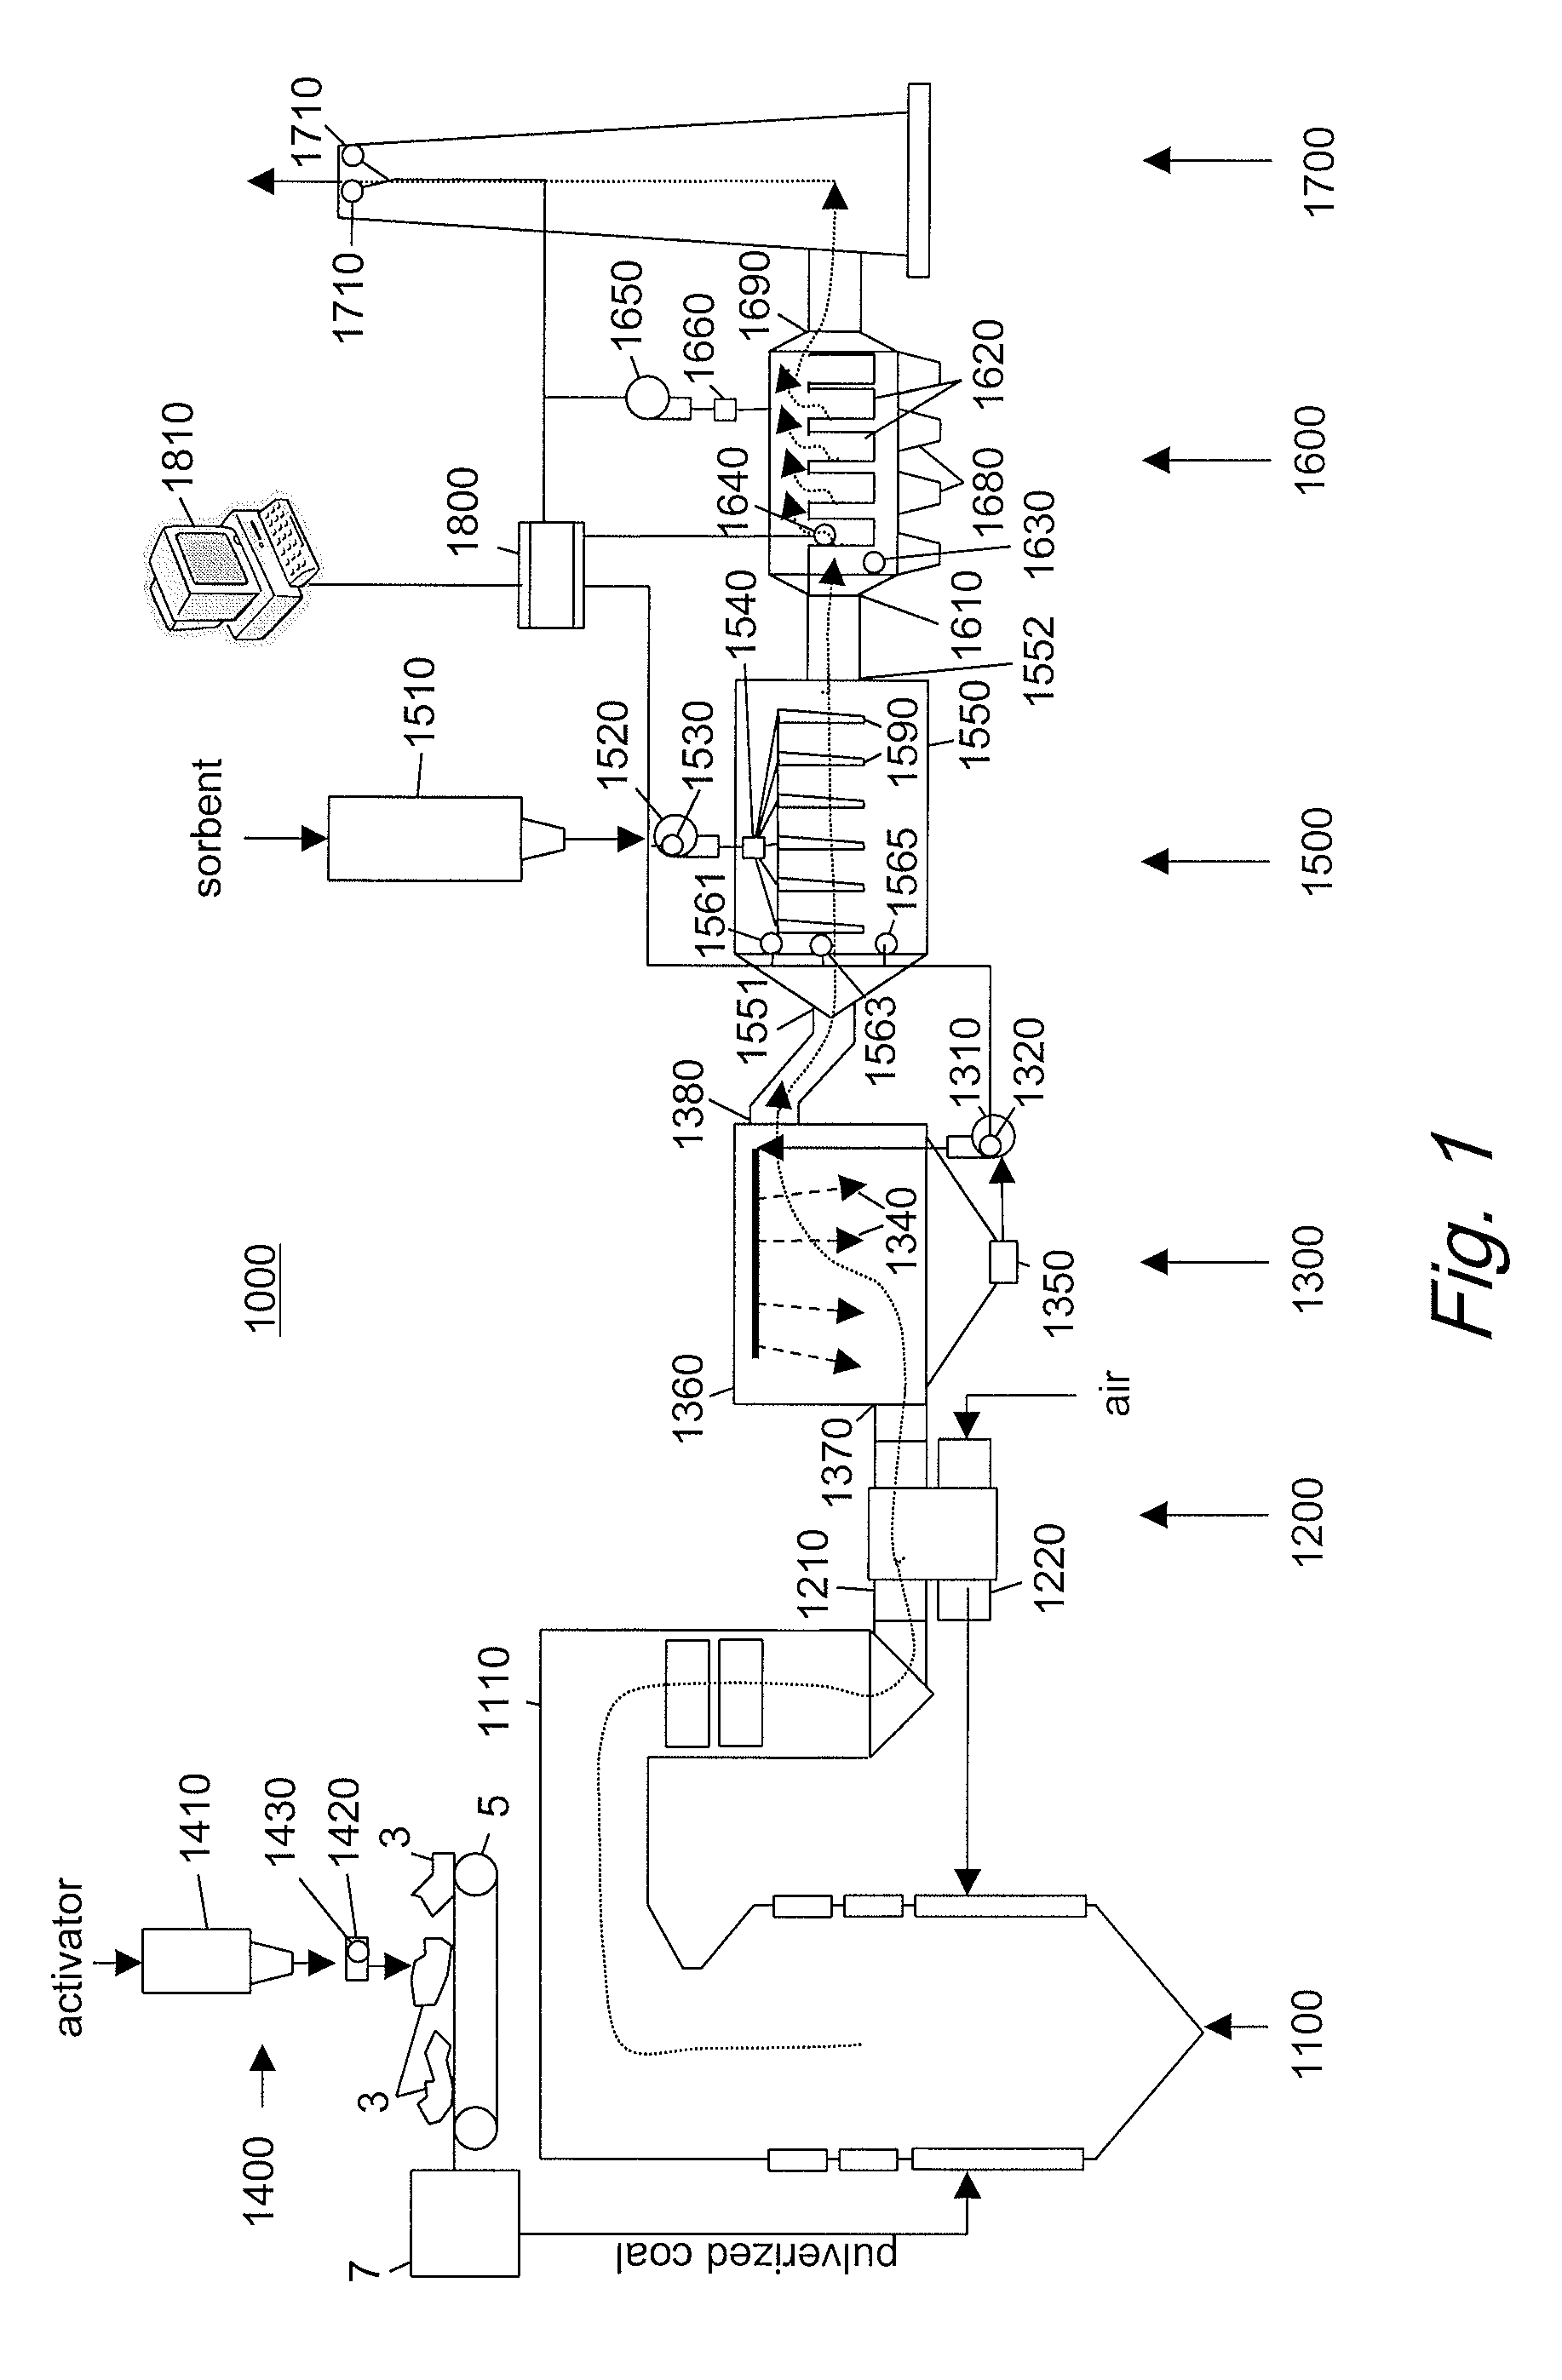 Integrated mercury control system